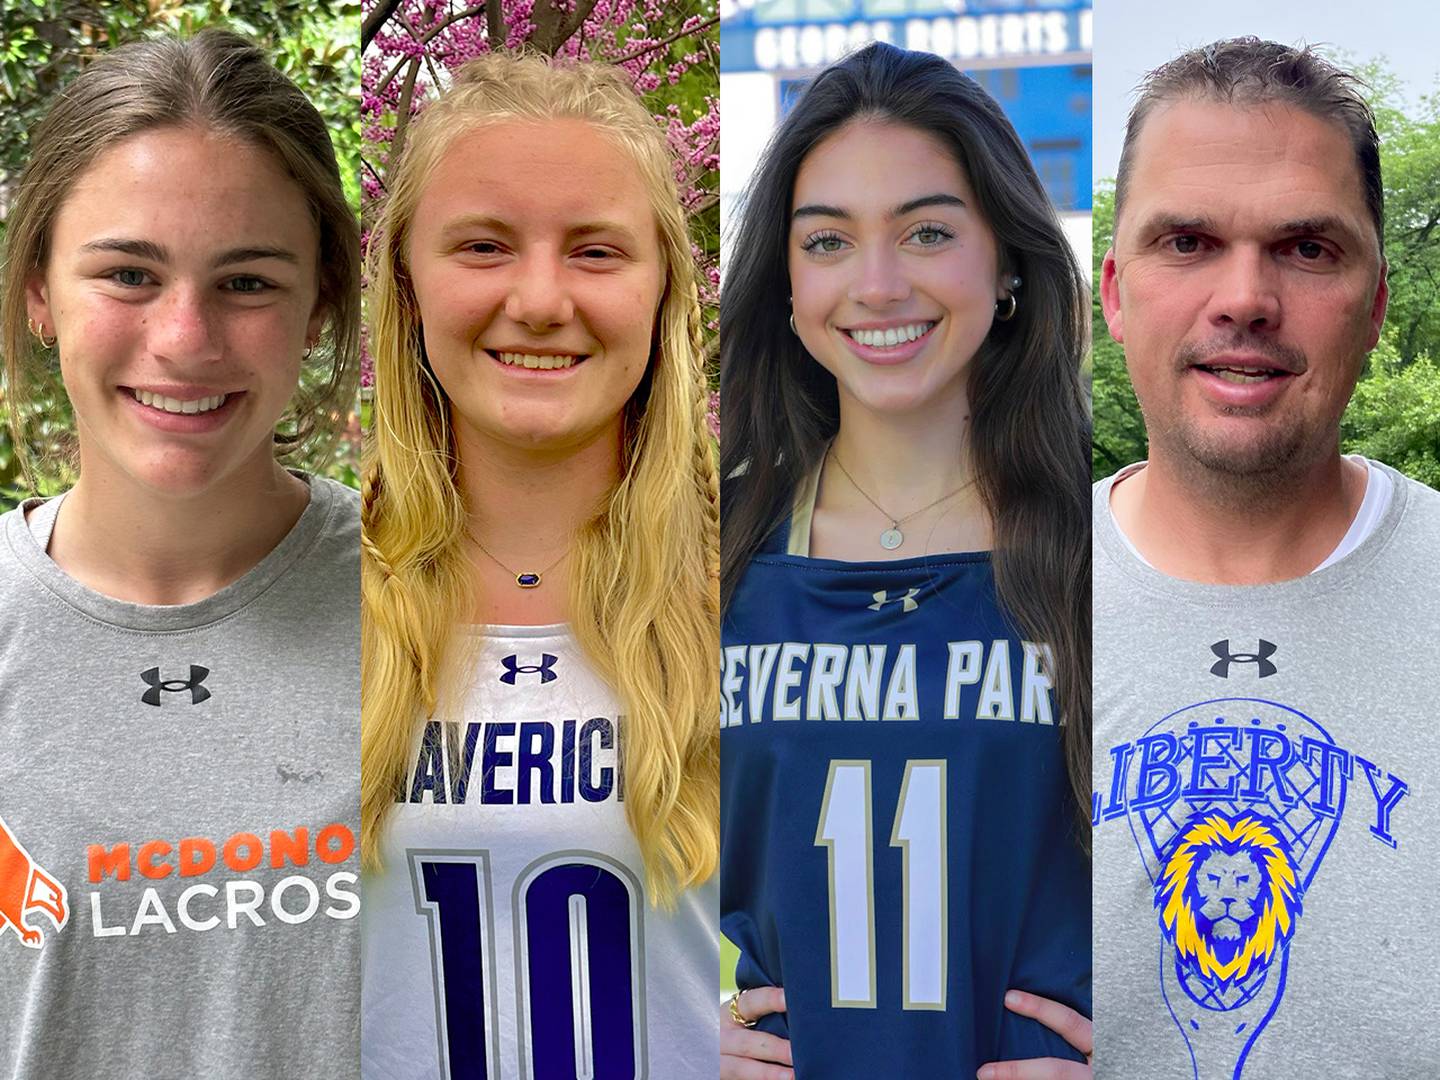 (From left) McDonogh's Kate Levy and Manchester Valley's Emma Penczek, the 2023 Baltimore Banner/VSN Girls Lacrosse Co-Players of the Year, Severna Park's Lilly Spilker, the 2023 Baltimore Banner/VSN Girls Lacrosse Defensive Player of the Year and Liberty's Tom Brandel, the 2023 Baltimore Banner/VSN Girls Lacrosse Coach of the Year.